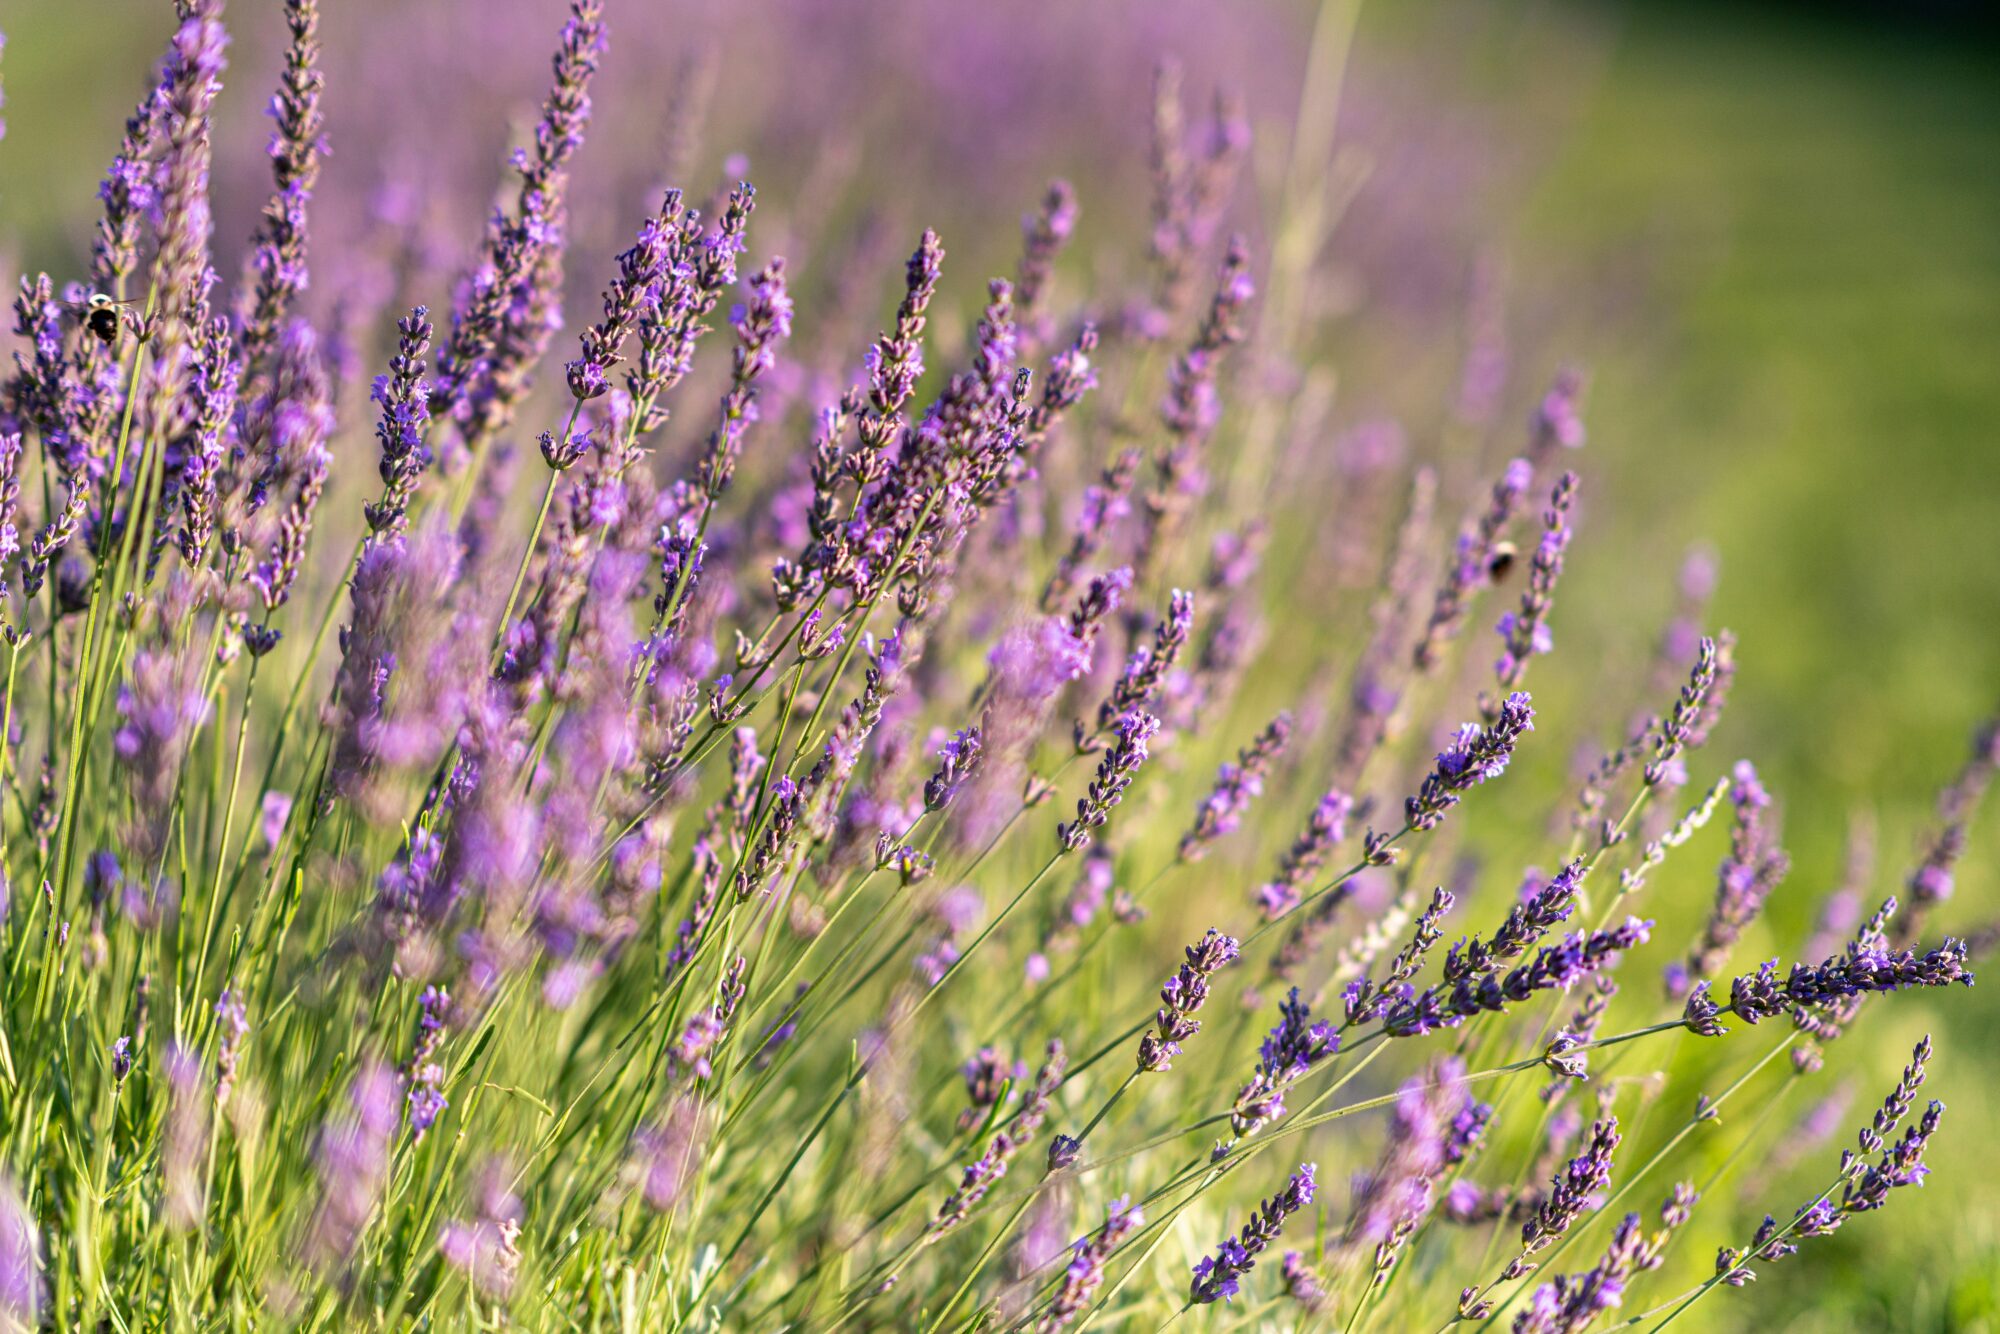 Vibrant lavender stalks sway gently, potential deadheading to encourage growth.